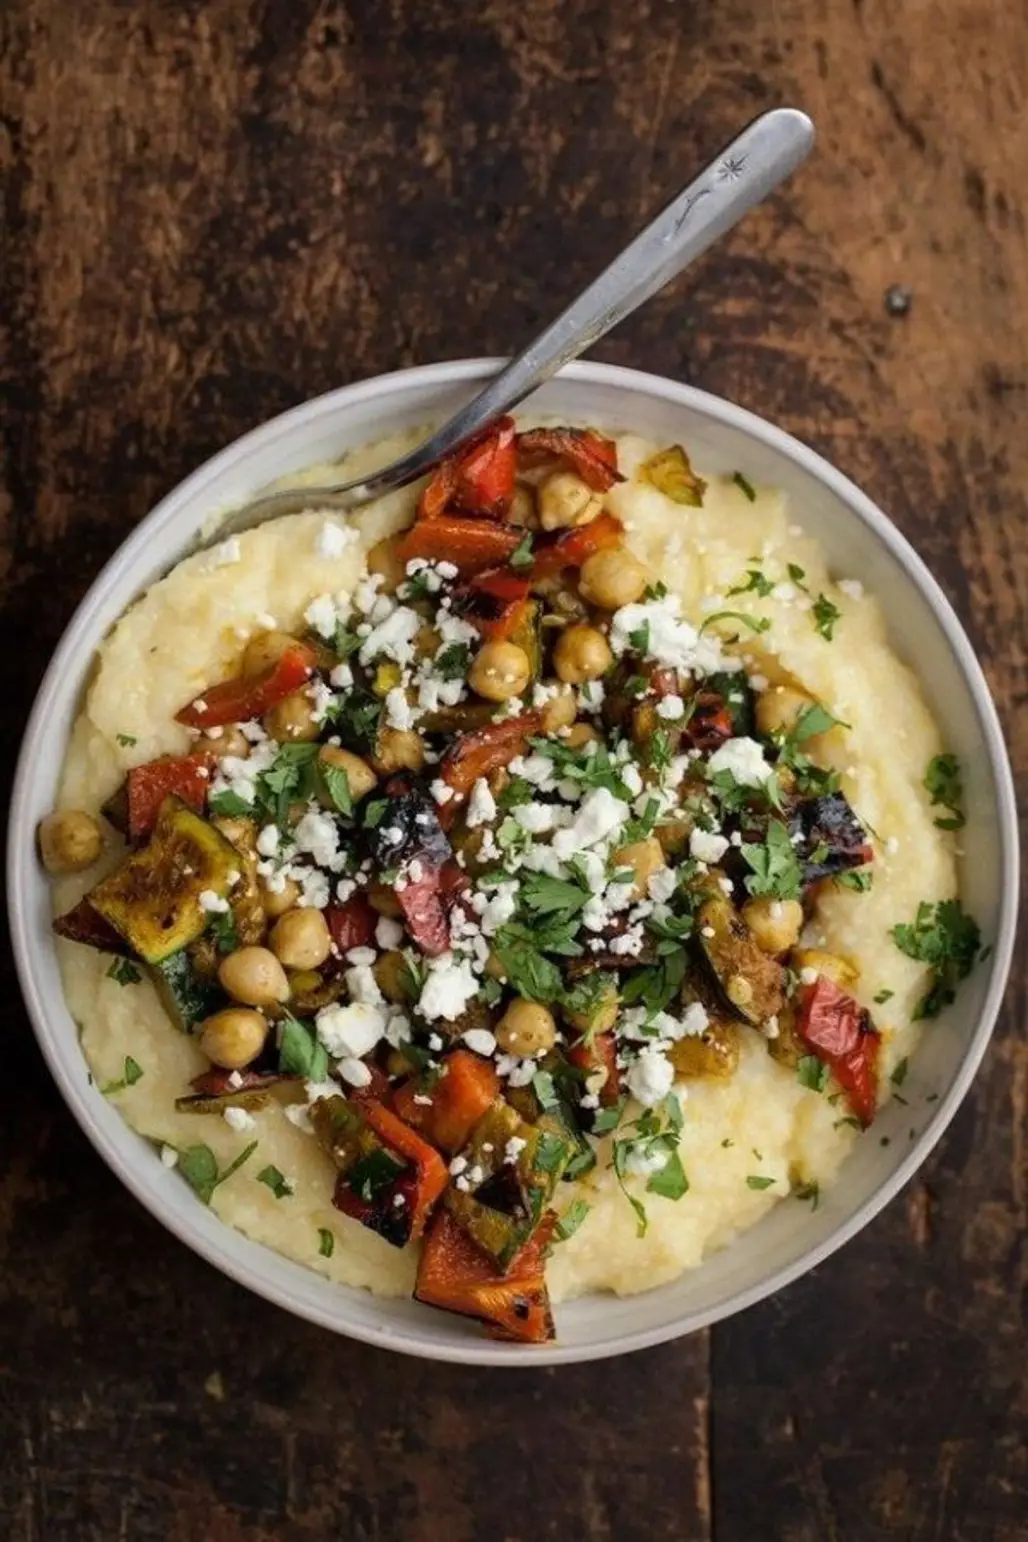 Curry Grilled Vegetables with Chickpeas and Creamy Polenta